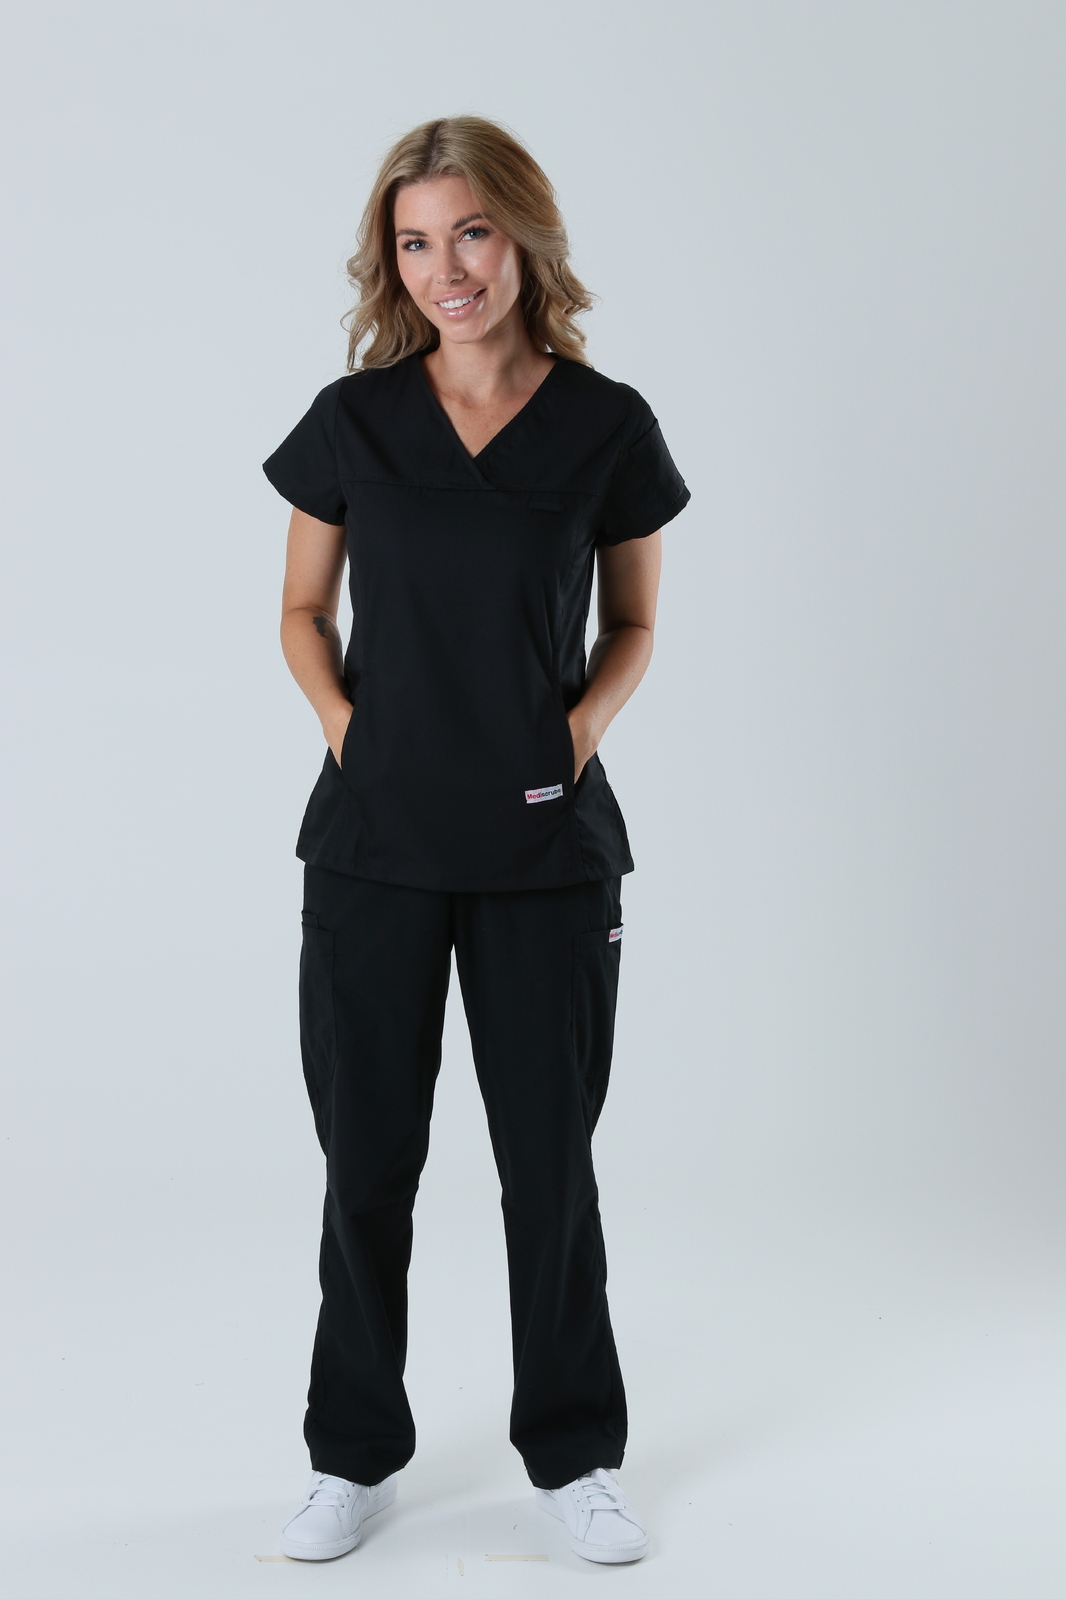 Canberra Hospital - Doctors (Women's Fit Solid Scrub Top and Cargo Pants in Black incl Logos)